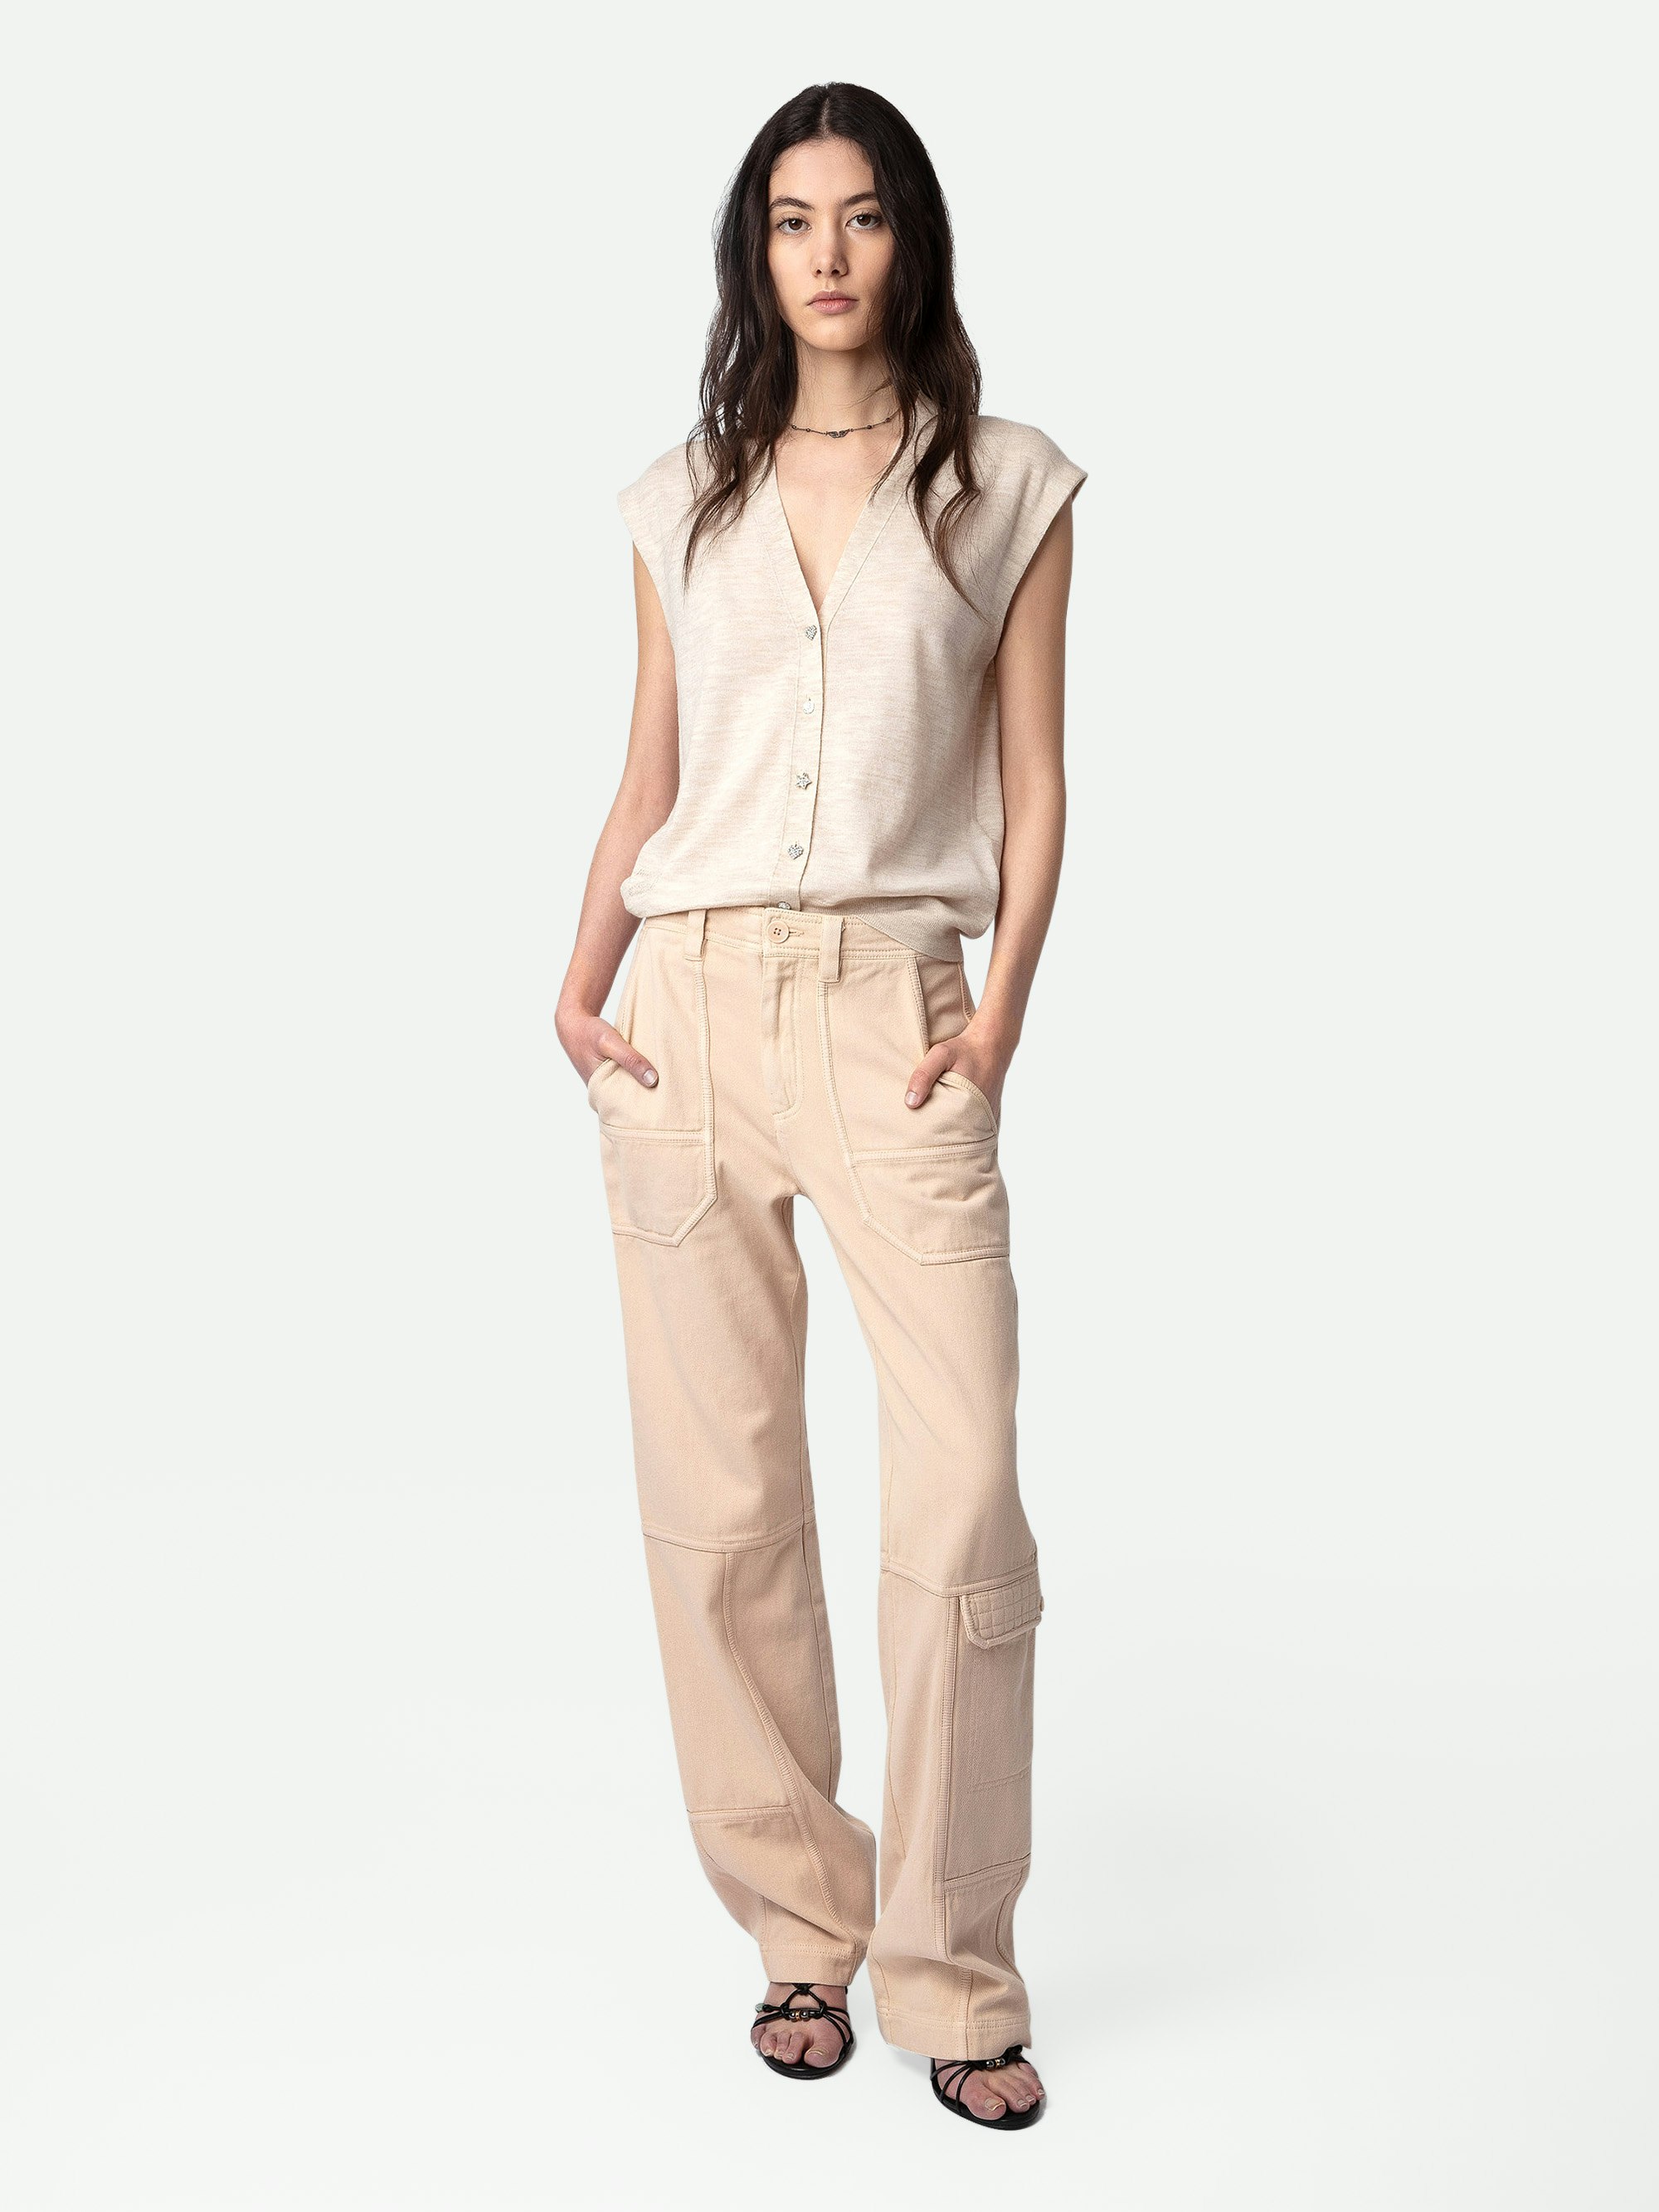 Pepper Trousers - Beige cotton twill trousers with contrasting details.